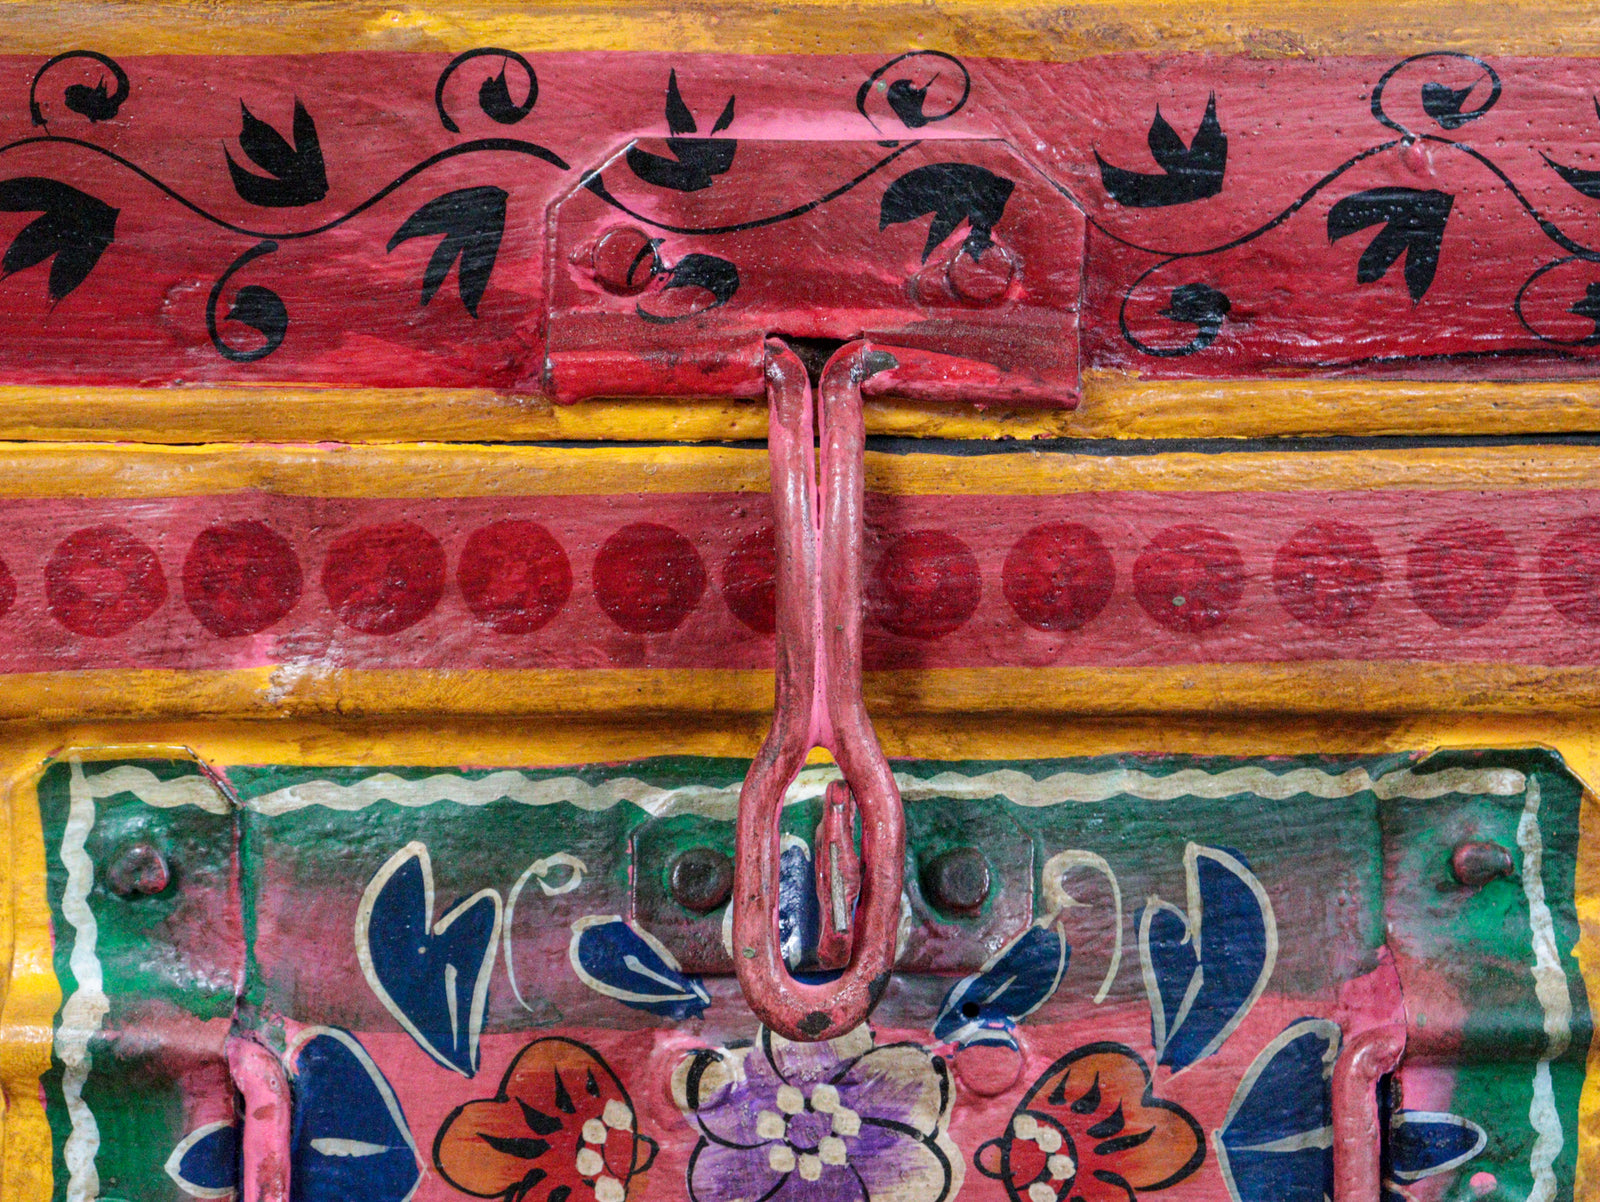 MILL-1499/1 Large Hand Painted Trunk C28